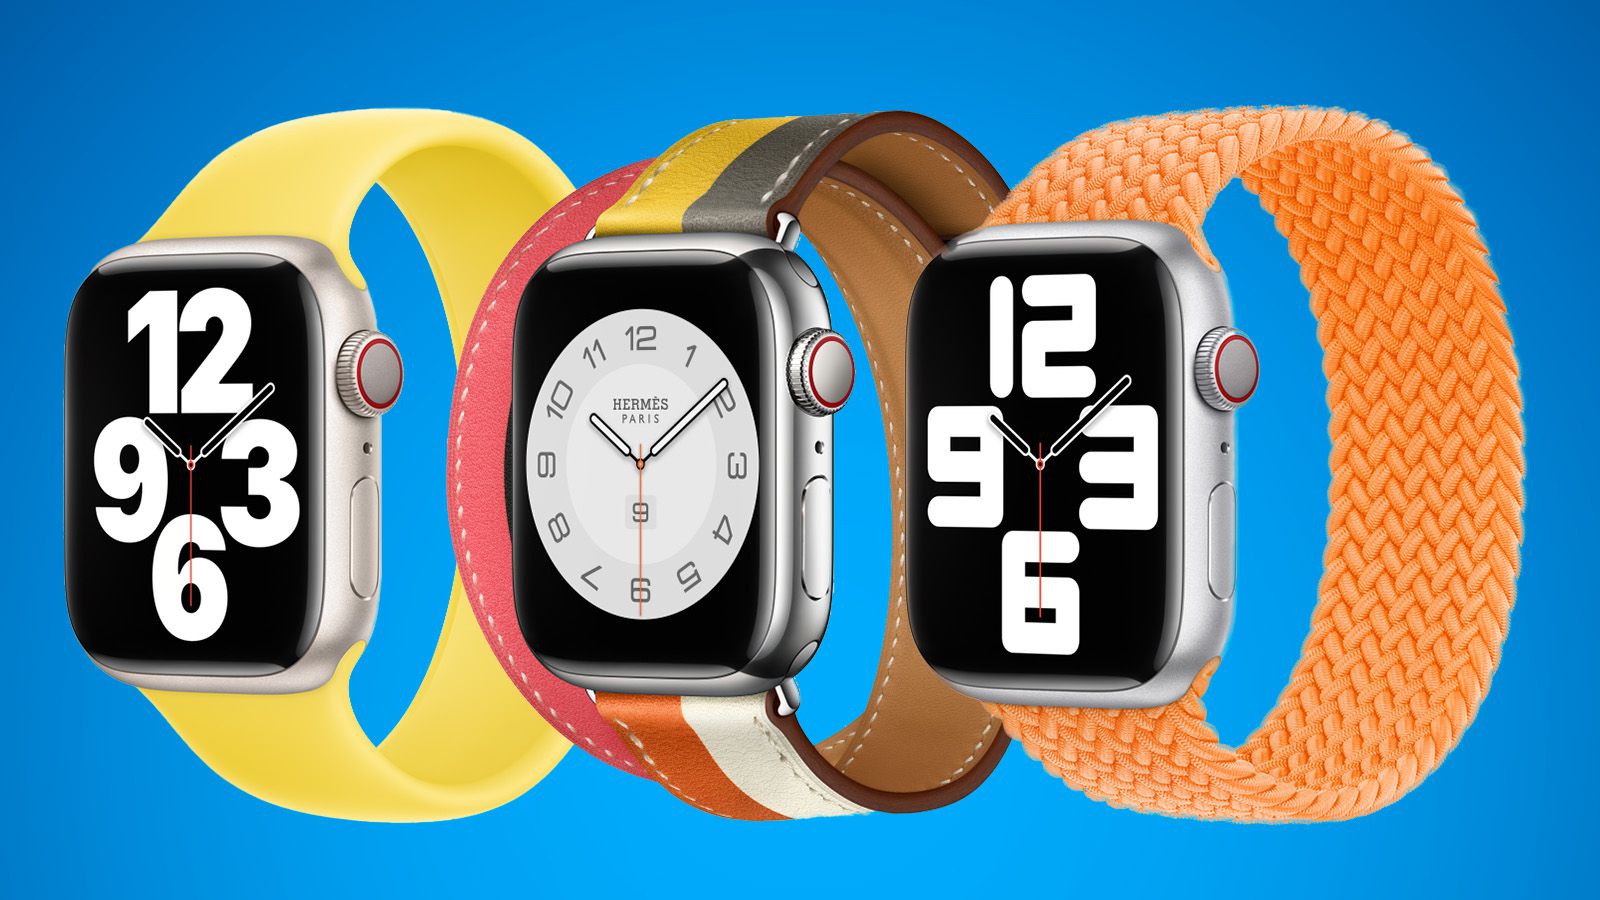 The Apple Watch looking stunning on a Orange Hermes style watch